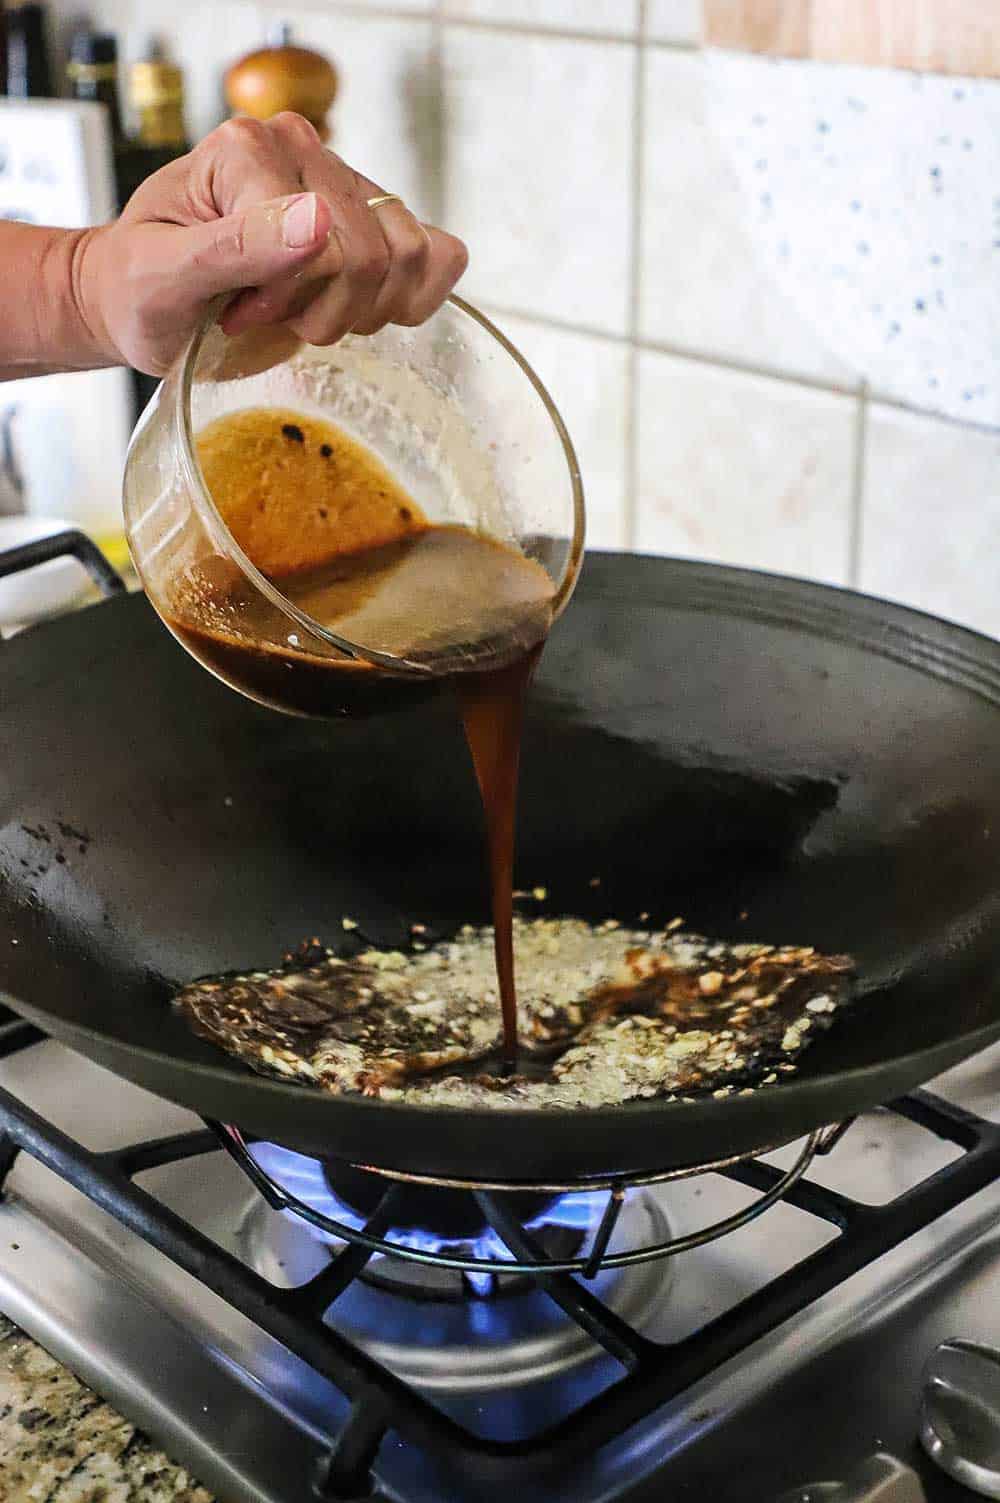 A person pouring a brown sauce into a wok filled with oil and garlic and ginger.